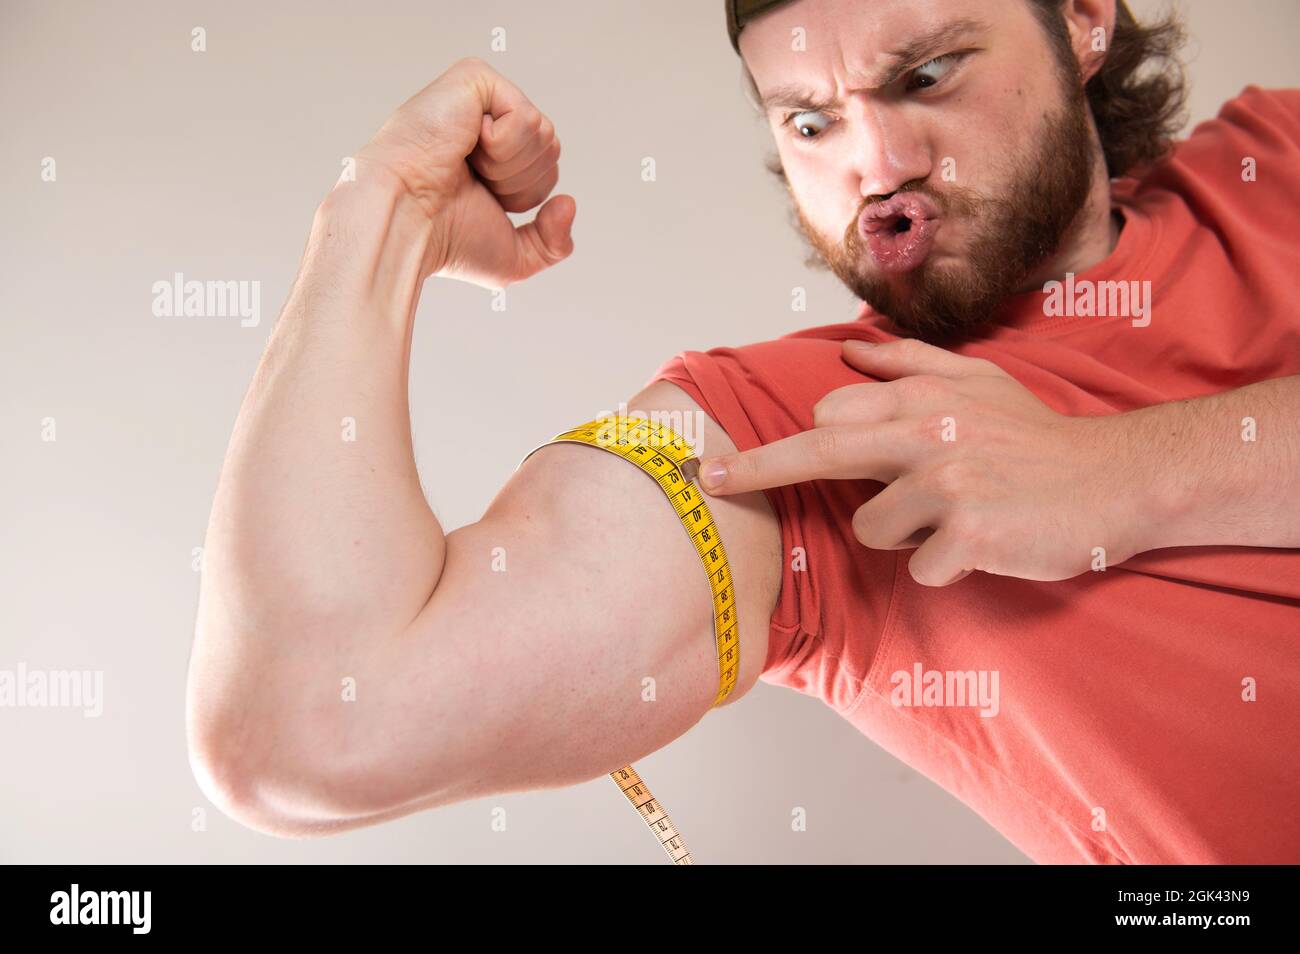 https://c8.alamy.com/comp/2GK43N9/bearded-funny-man-measuring-biceps-muscles-of-his-arm-with-a-yellow-tape-measure-2GK43N9.jpg